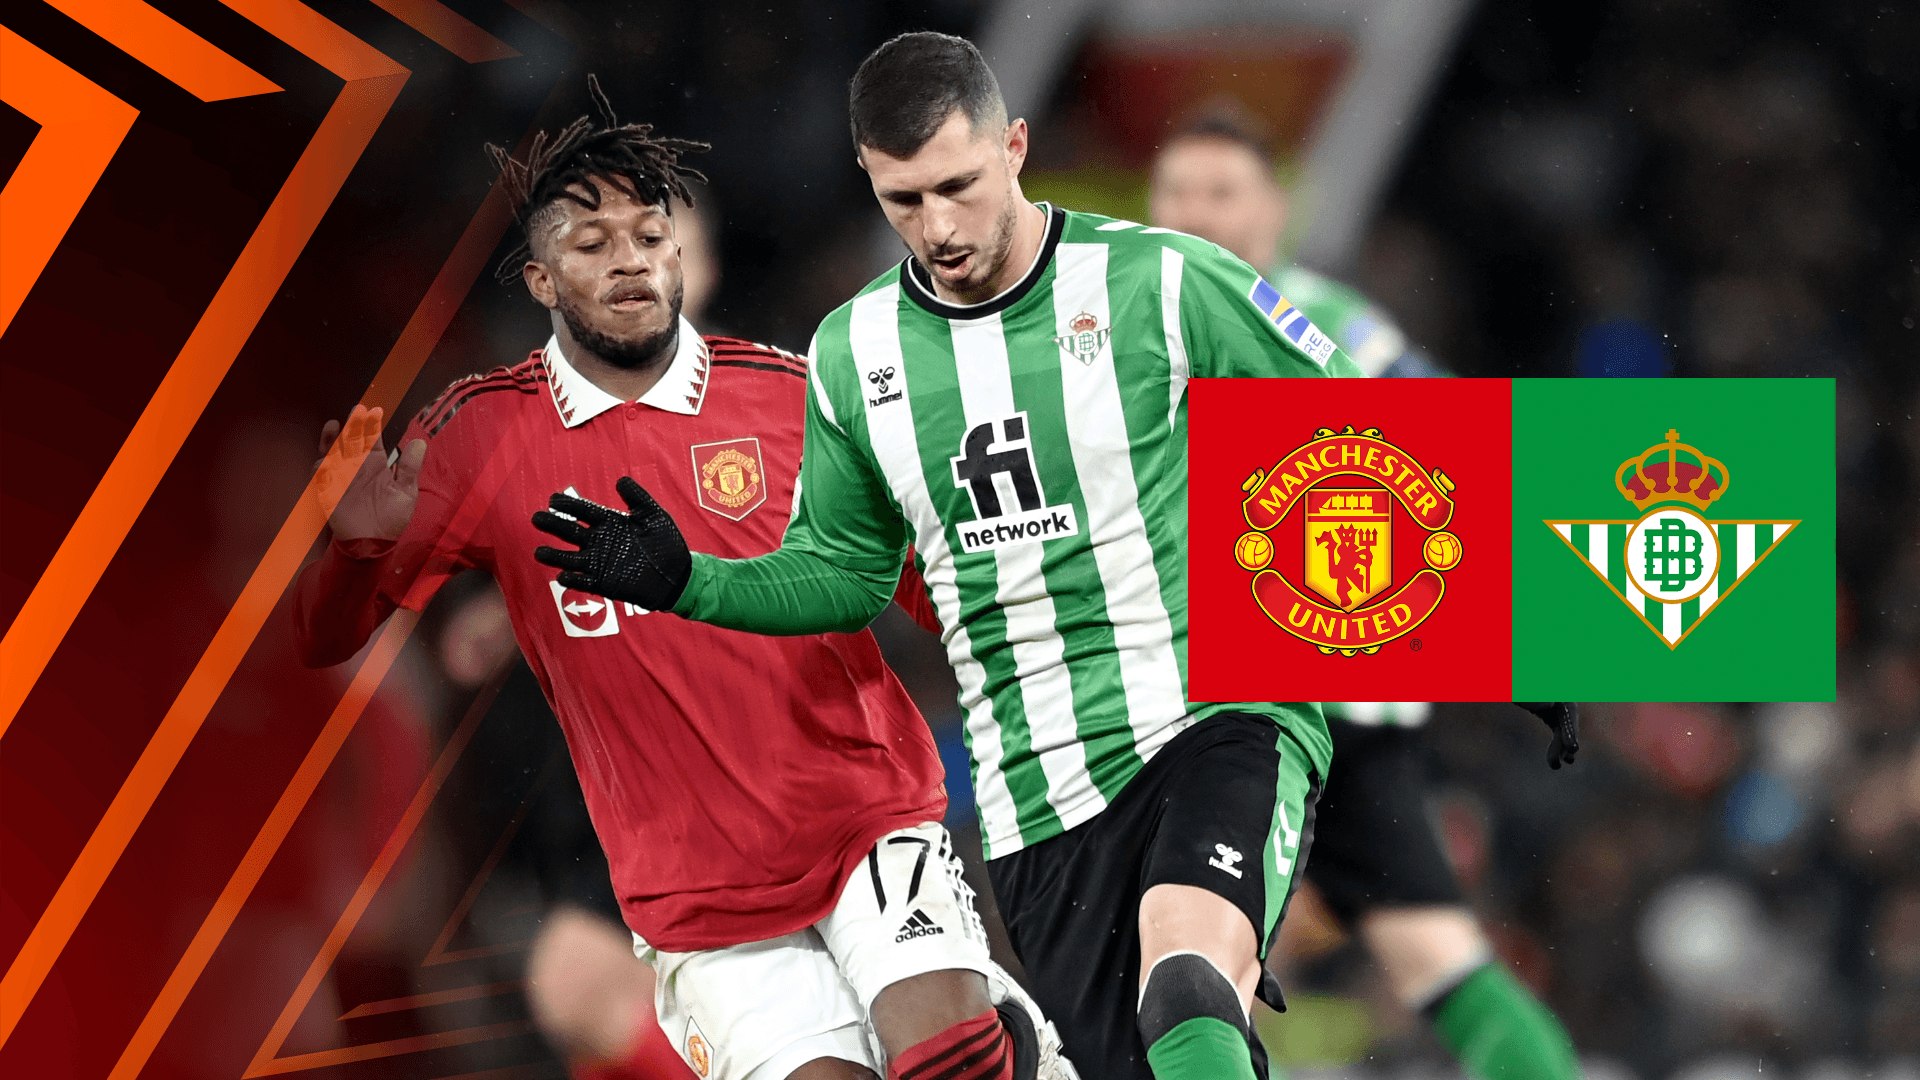 EUROPA LEAGUE: 1/8 Final Real Betis vs Manchester United Live Score and Live Stream